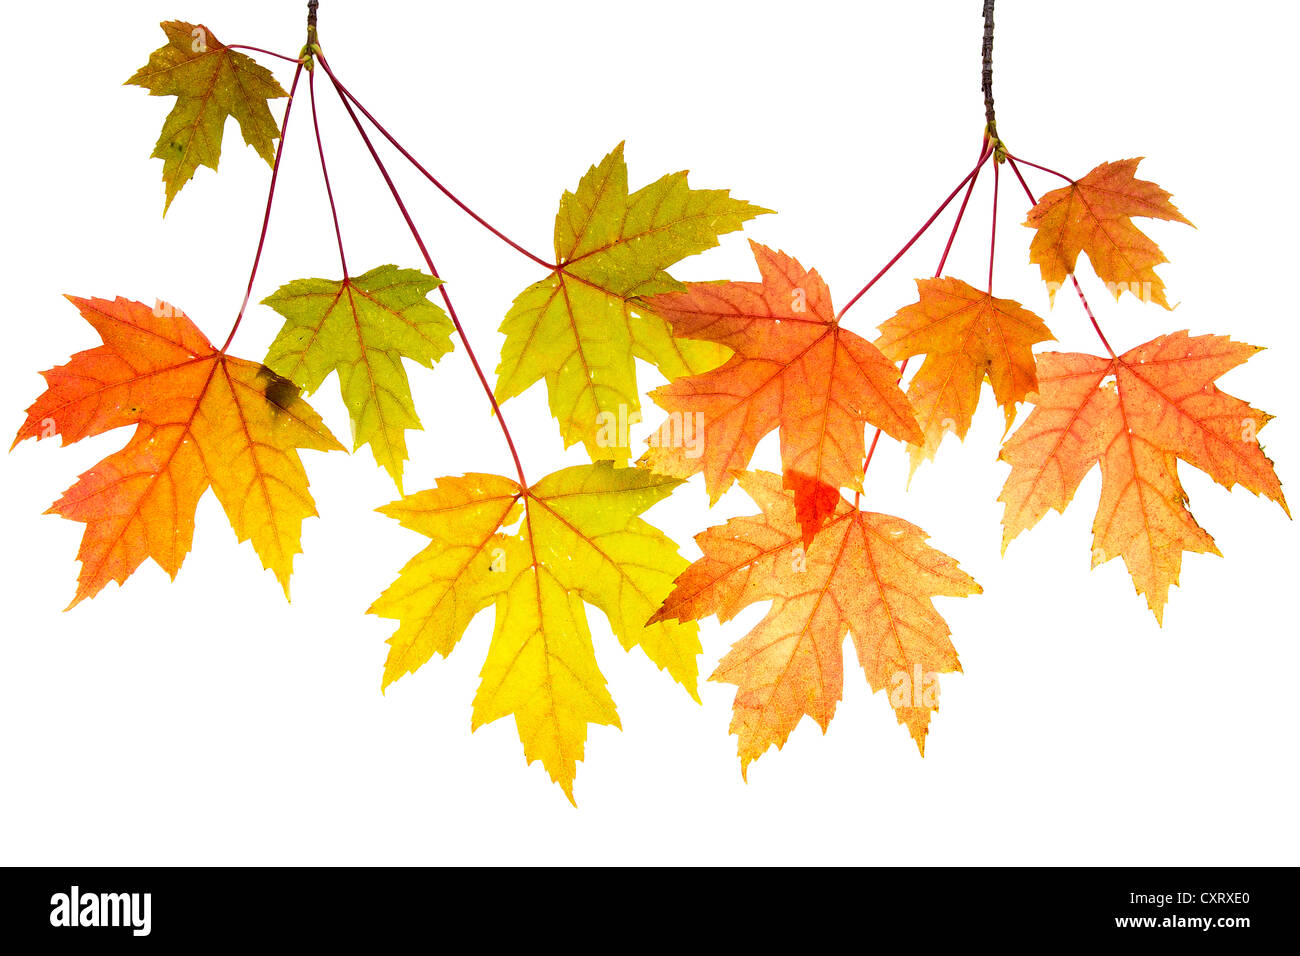 Hanging Maple Tree Branches with Changing Fall Leaves Isolated on White Background Stock Photo